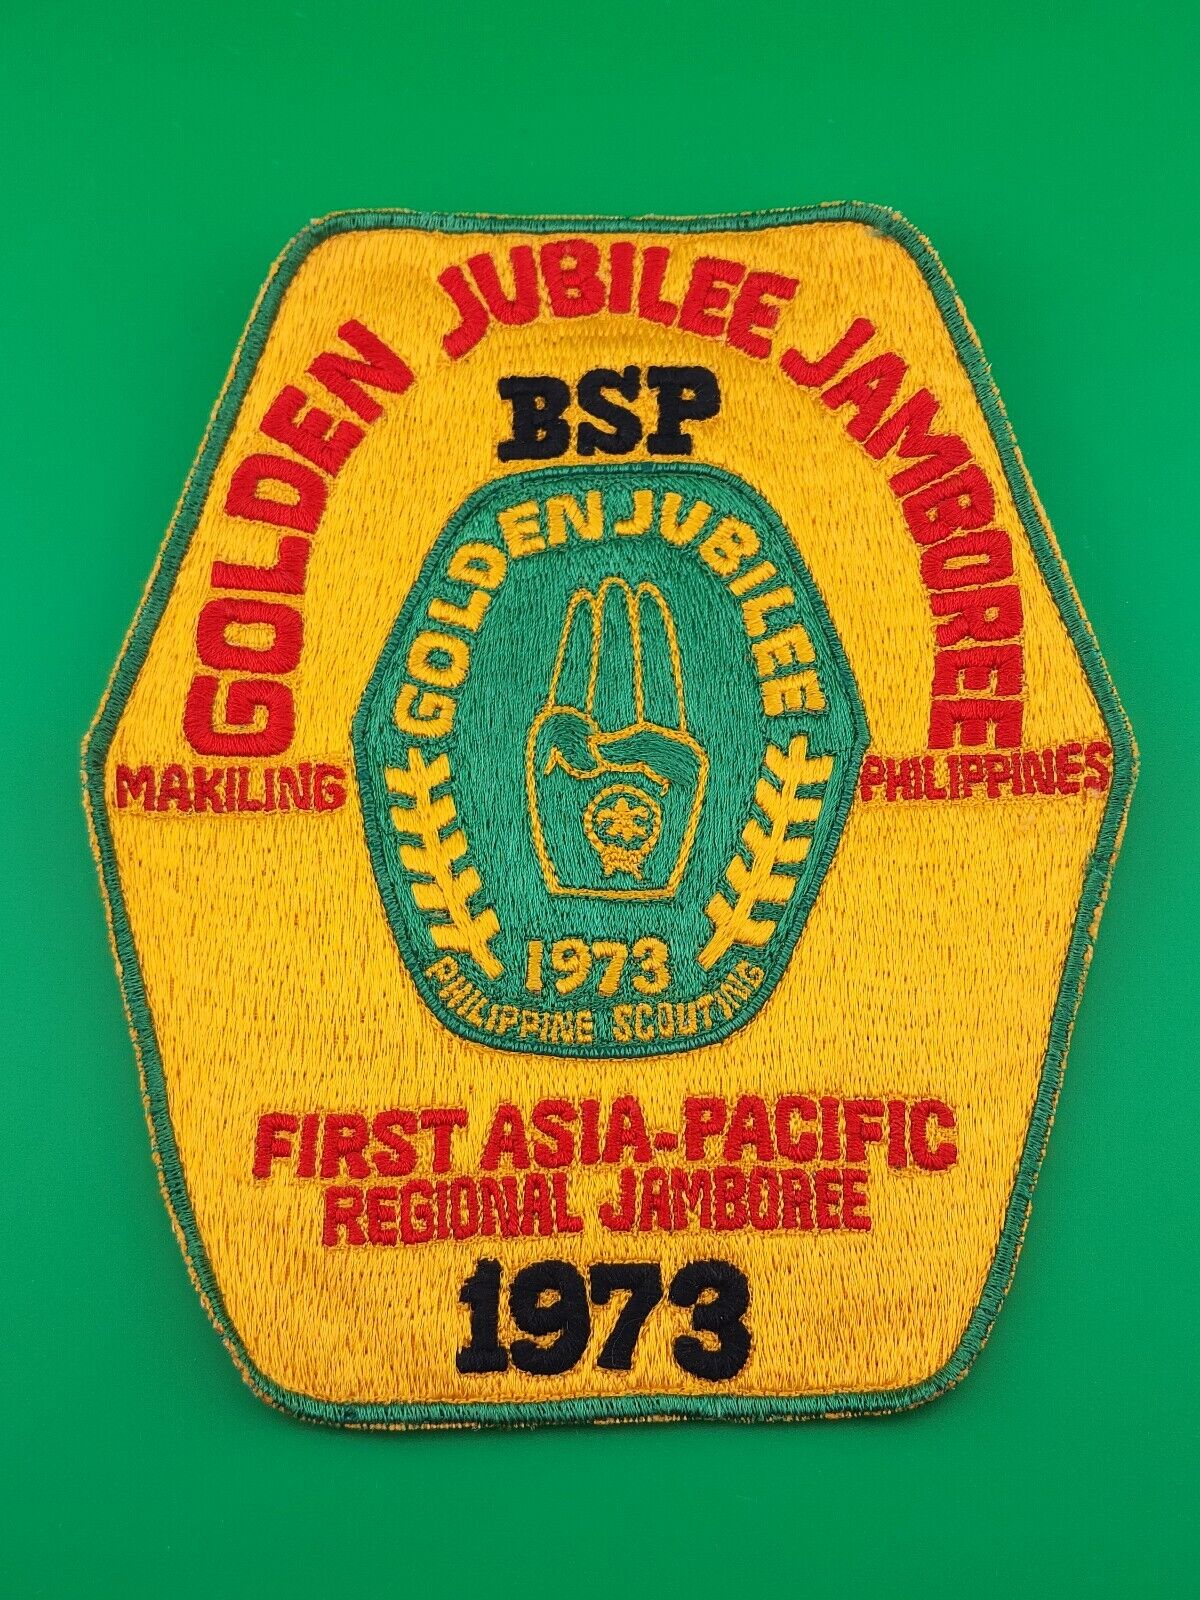 Golden Jubilee Jamboree First Asia-Pacific 1973 Jacket Patch 7\